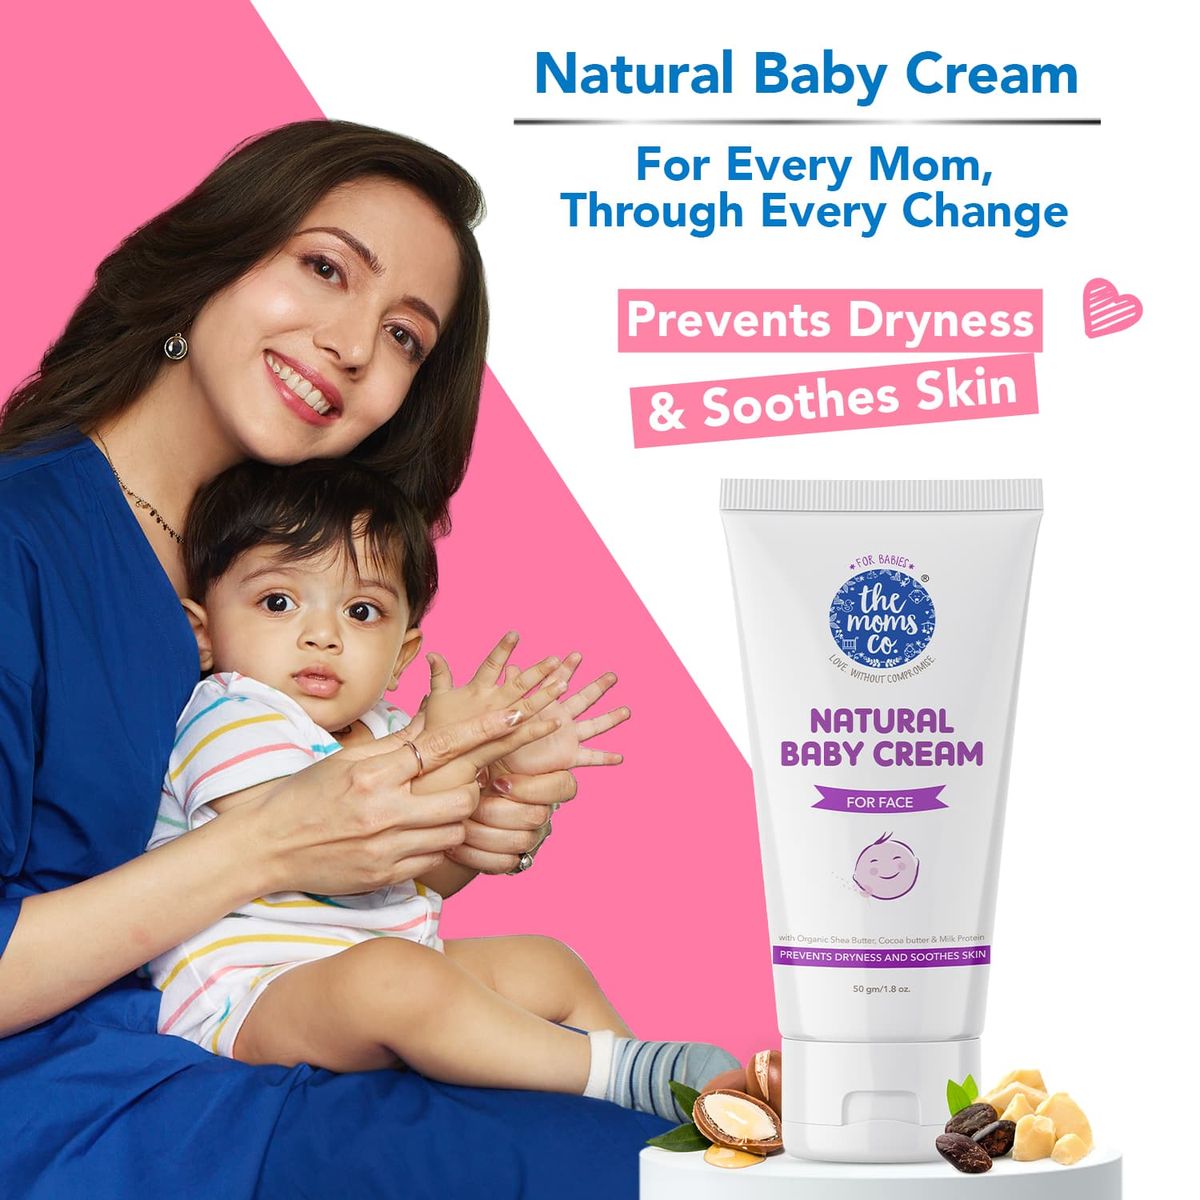 The Moms Co. Natural Baby Face Cream